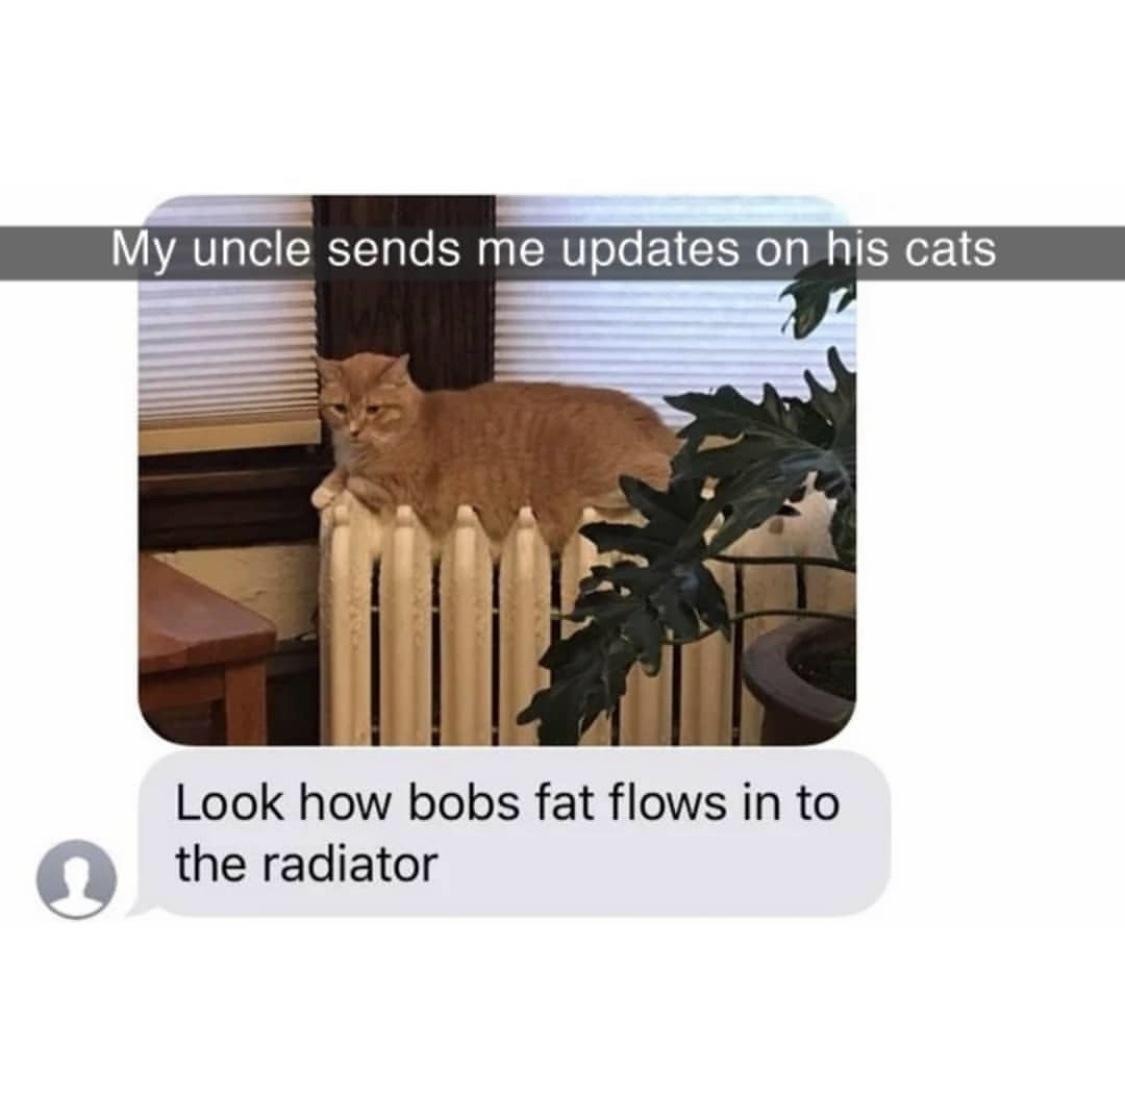 fresh memes -  furniture - My uncle sends me updates on his cats Look how bobs fat flows in to the radiator